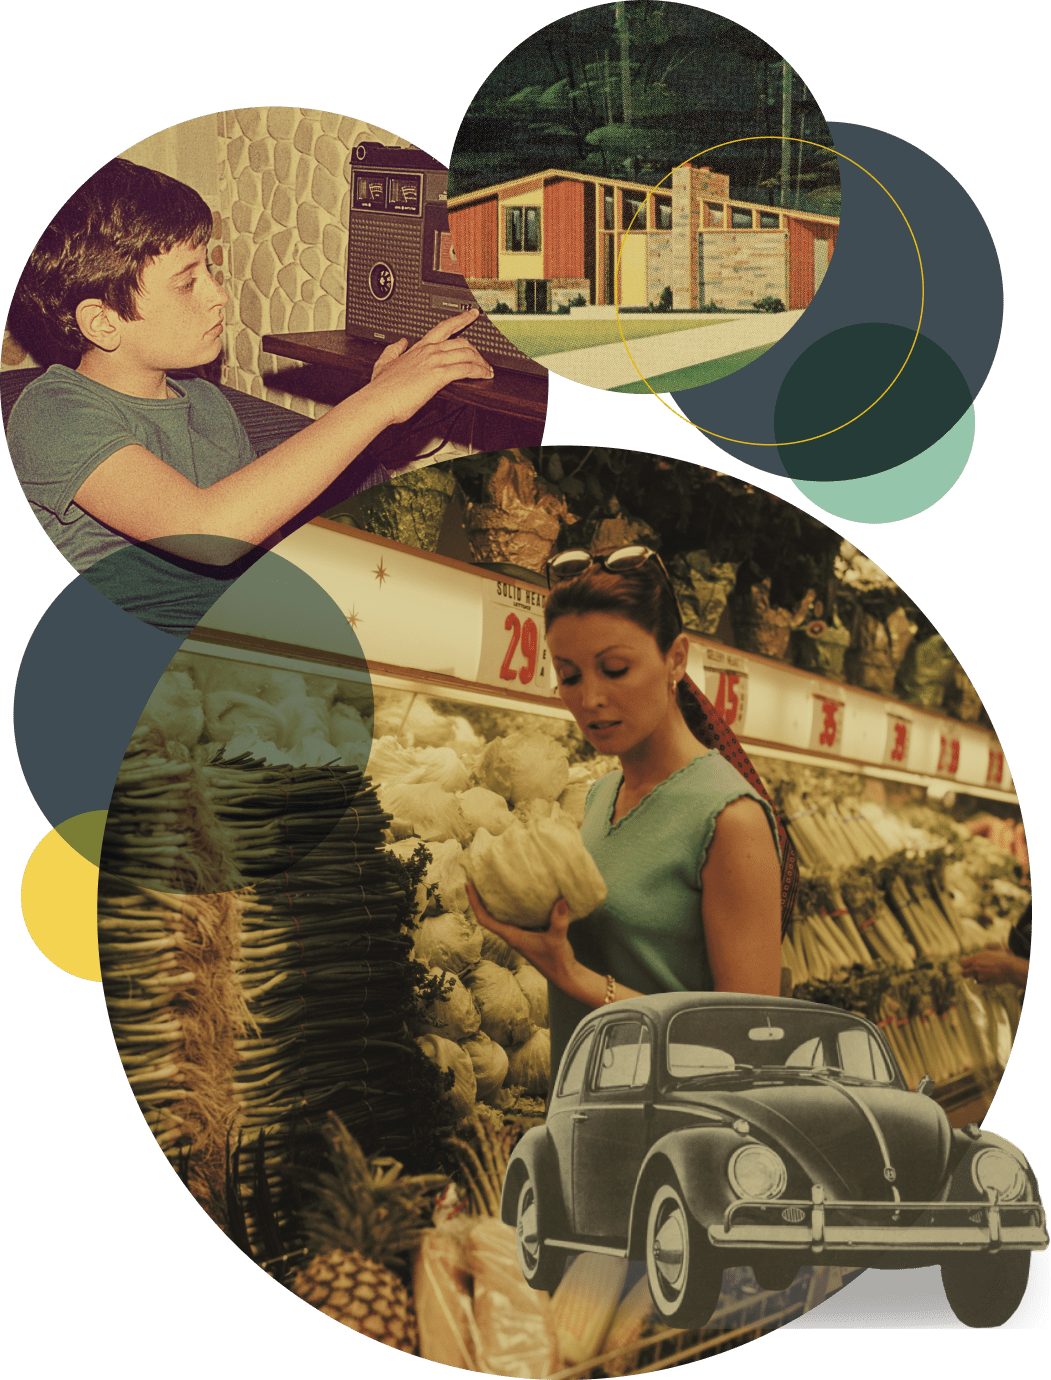 A compilation of vintage images inside of circles; a boy playing with an old radio, a house, a woman grocery shopping and an antique Volkswagen.